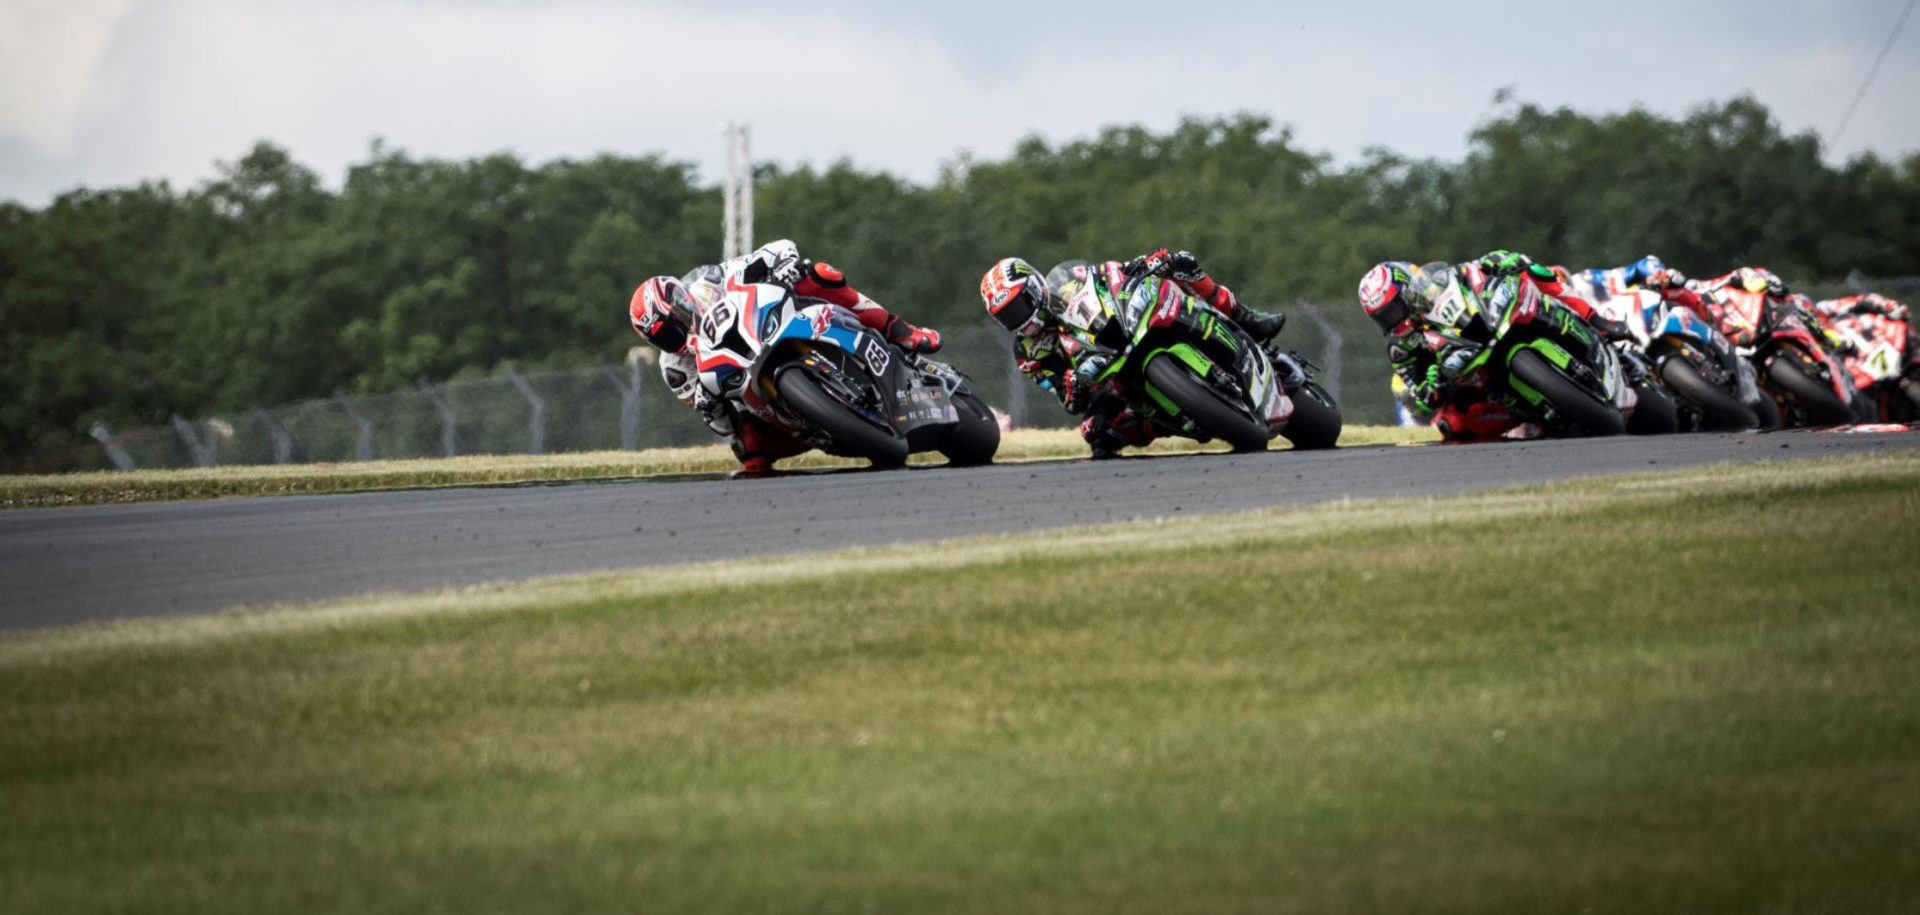 Tom Sykes (66) leads Jonathan Rea (1), Leon Haslam (91) and others during a World Superbike race at Donington Park in 2019. Photo courtesy BMW Motorrad Motorsport.